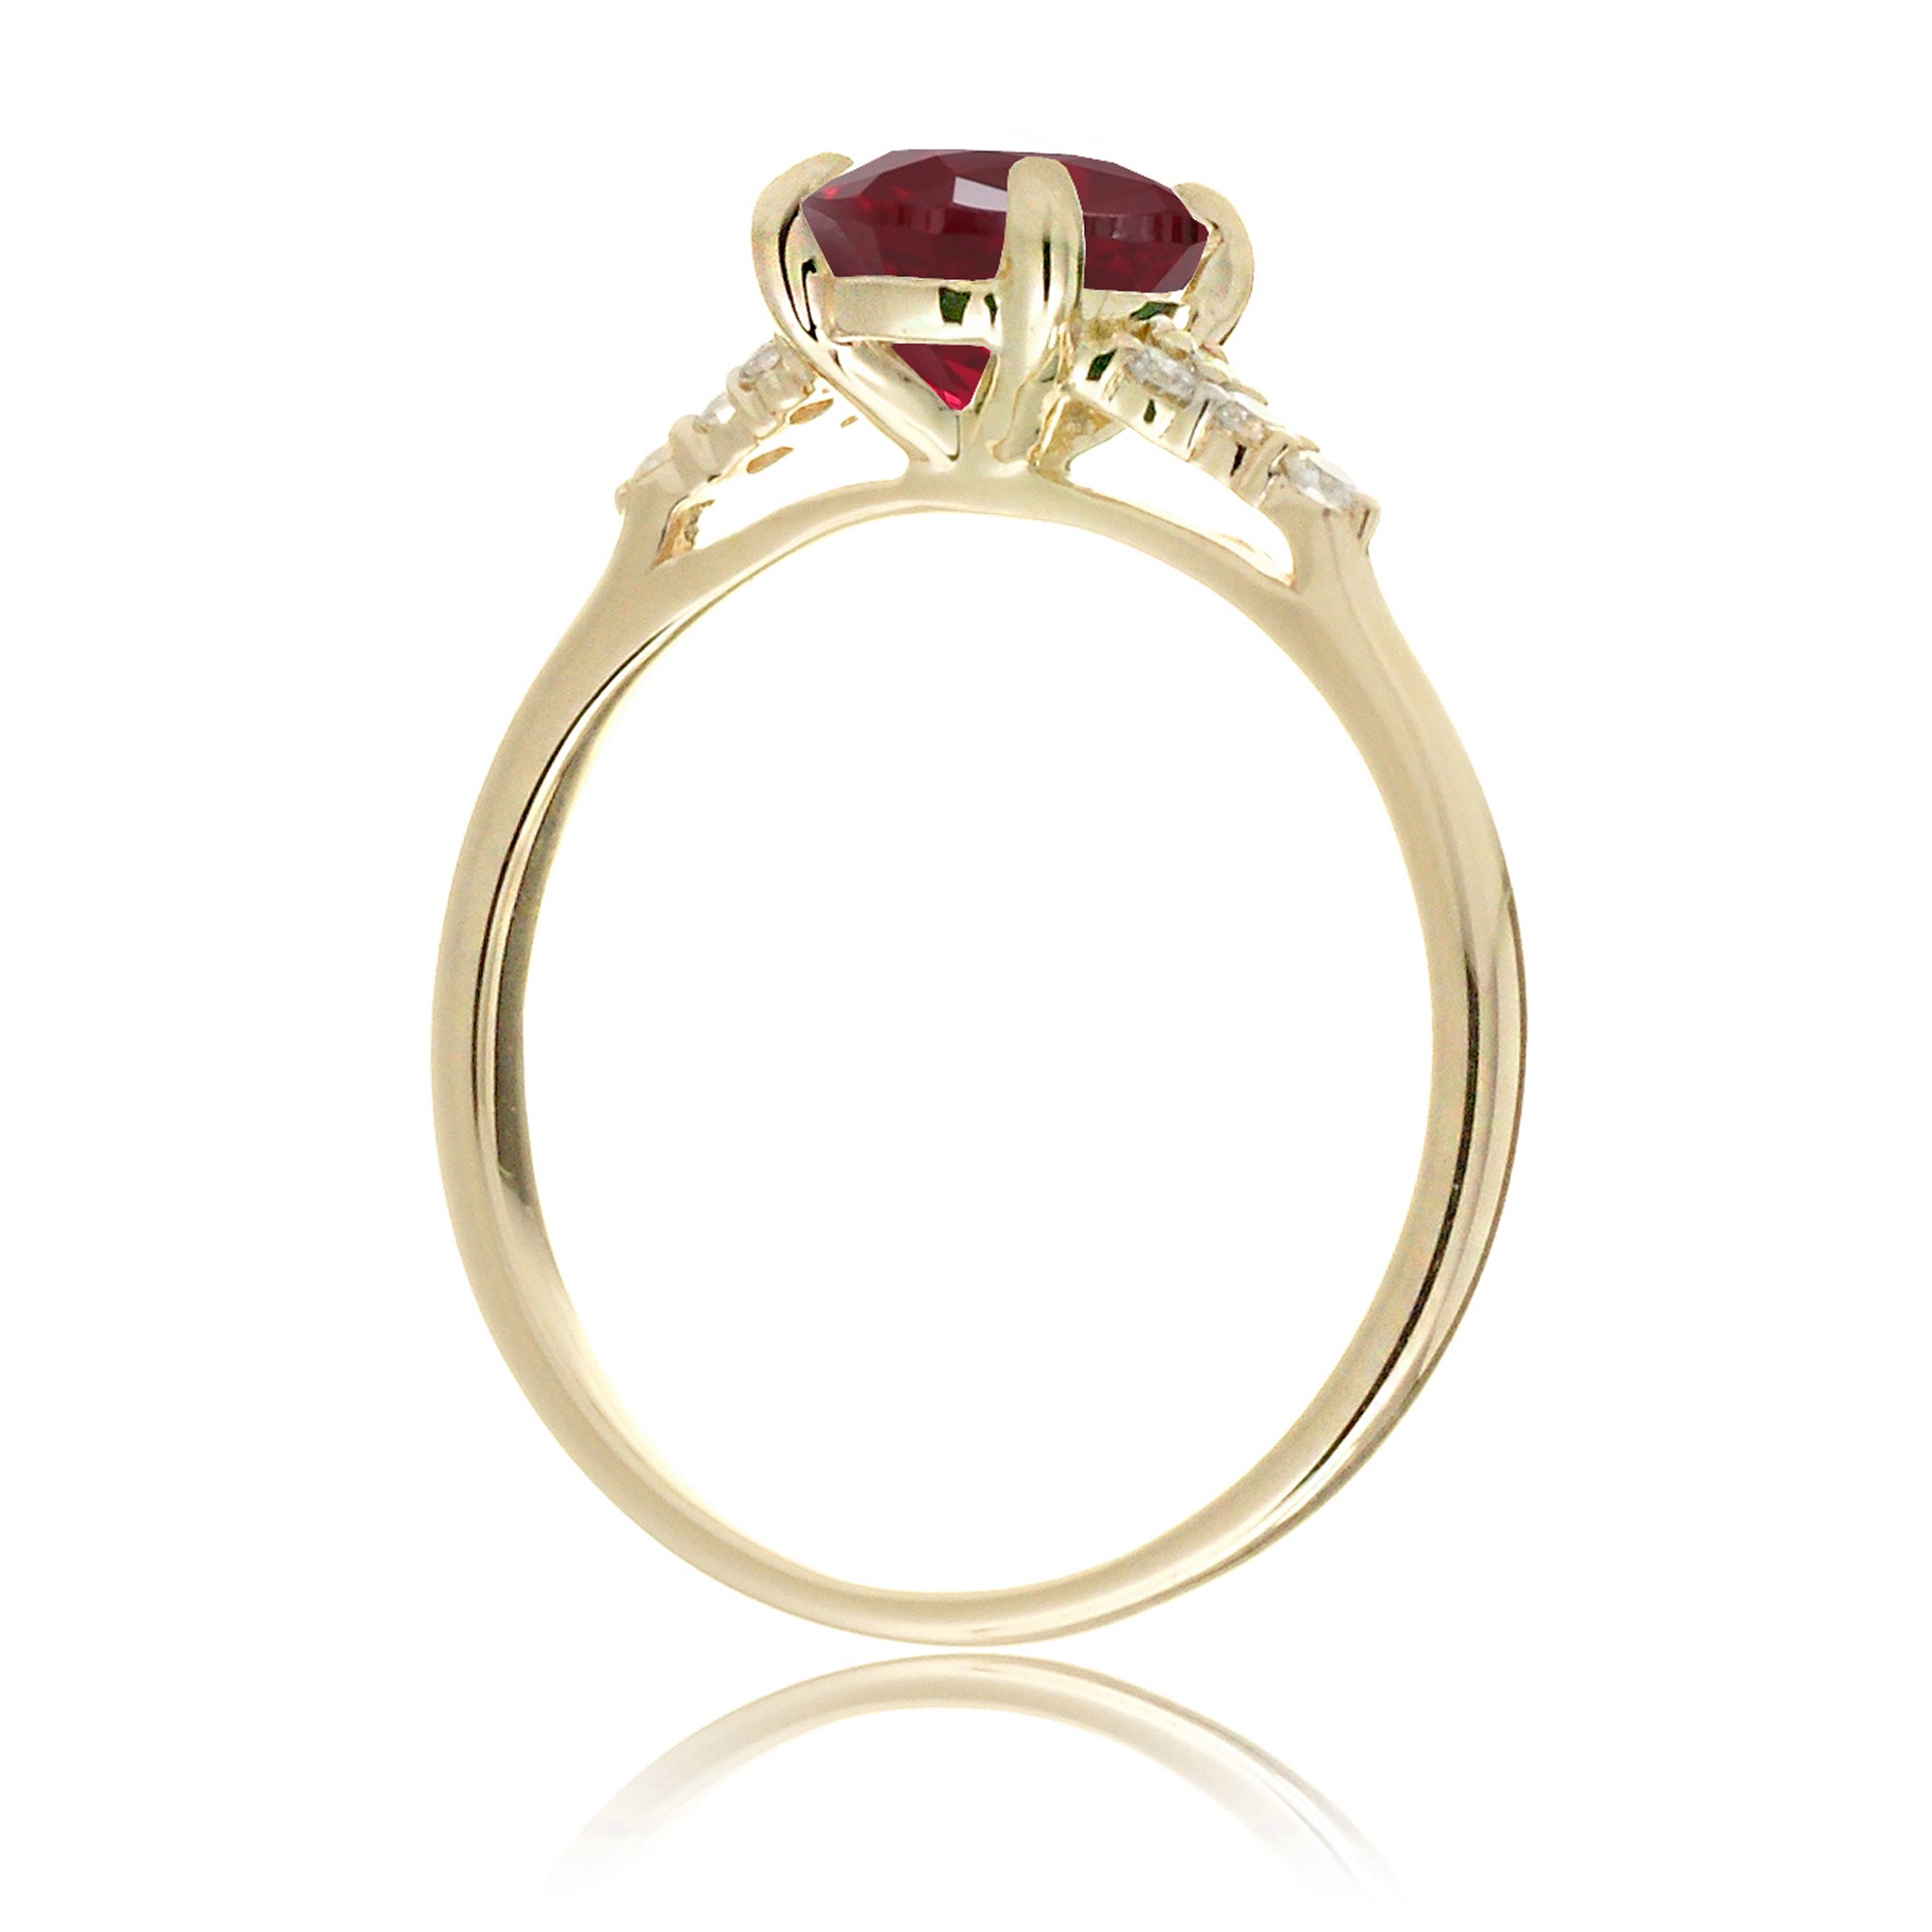 Emerald cut ruby and diamond three stone ring in yellow gold